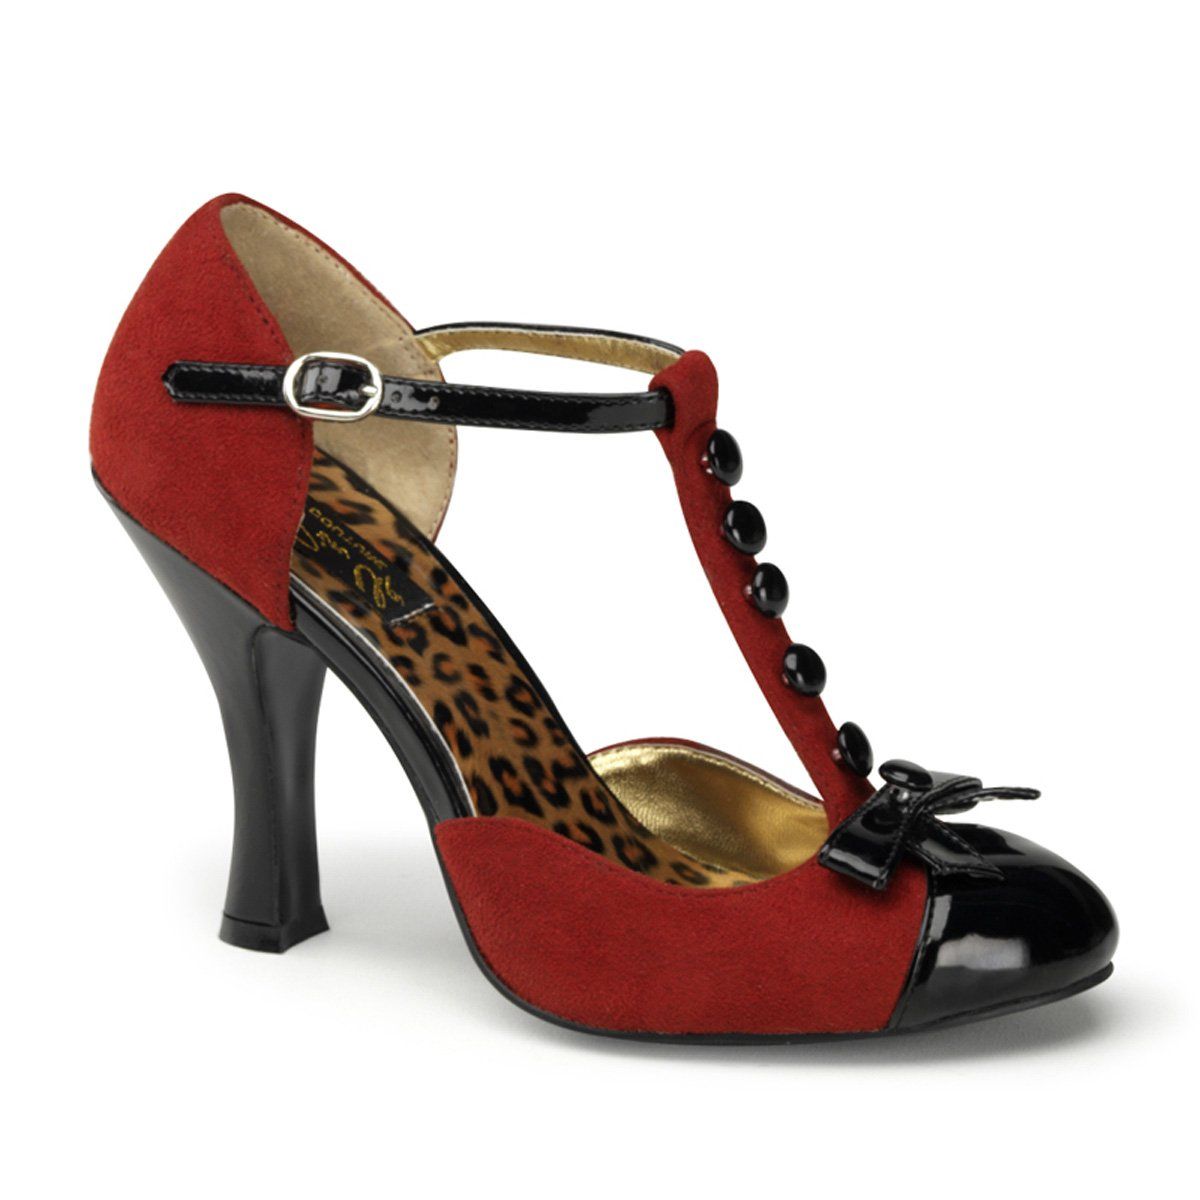 SMITTEN-10 Red Suede-Black Patent Pin Up Couture